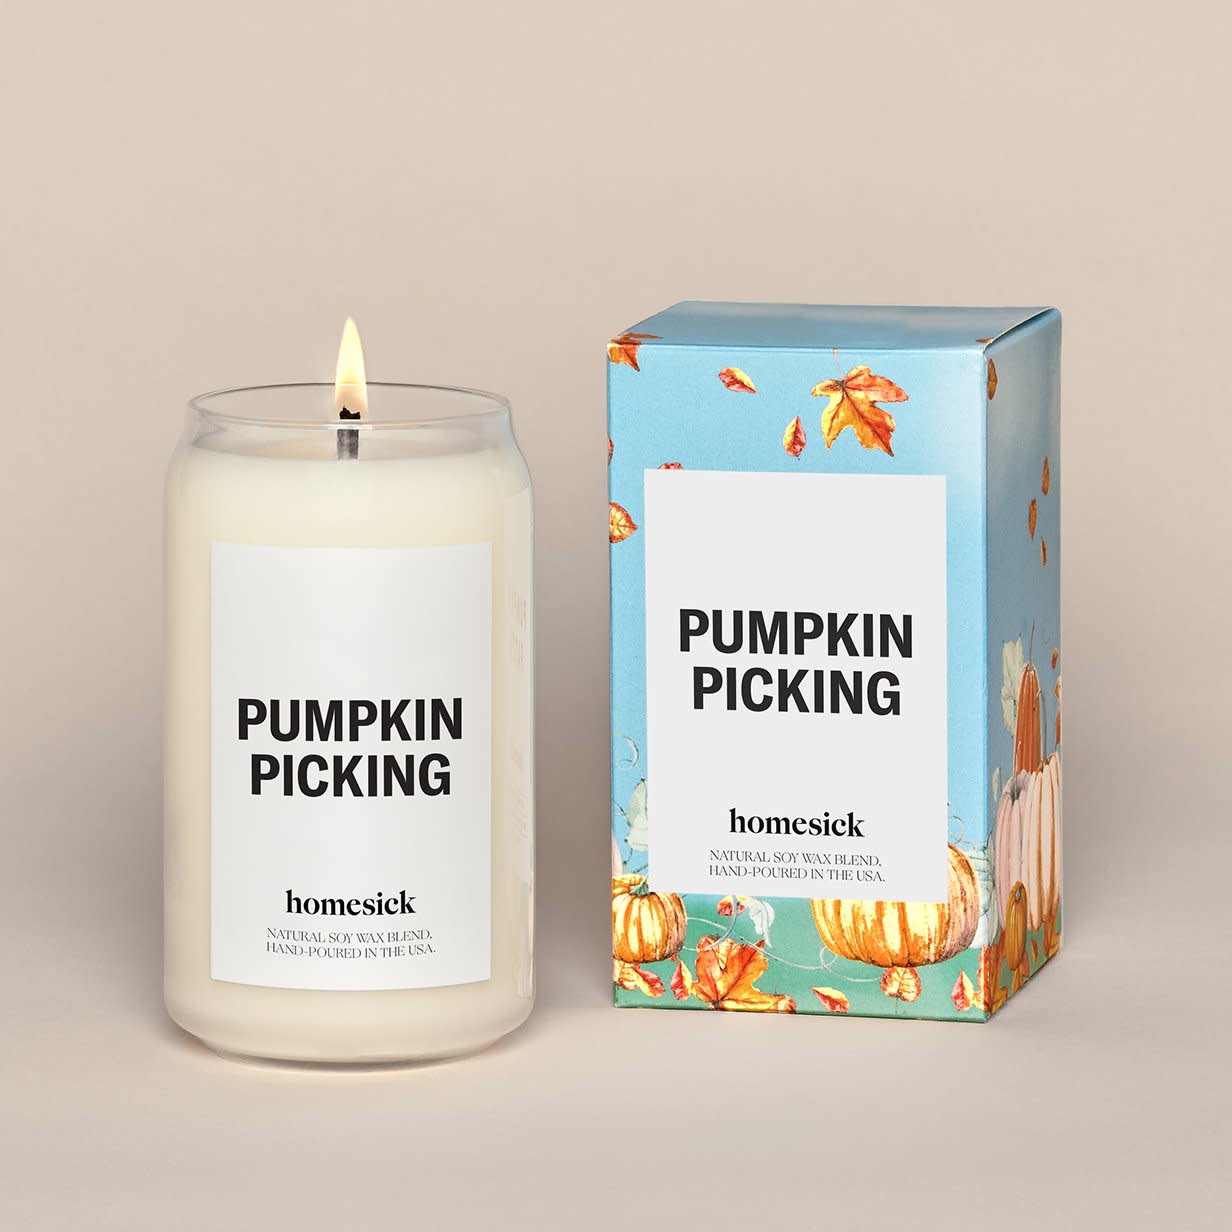 Yankee Candle Launches Autumn Candle For Halloween, Pumpkin Patch